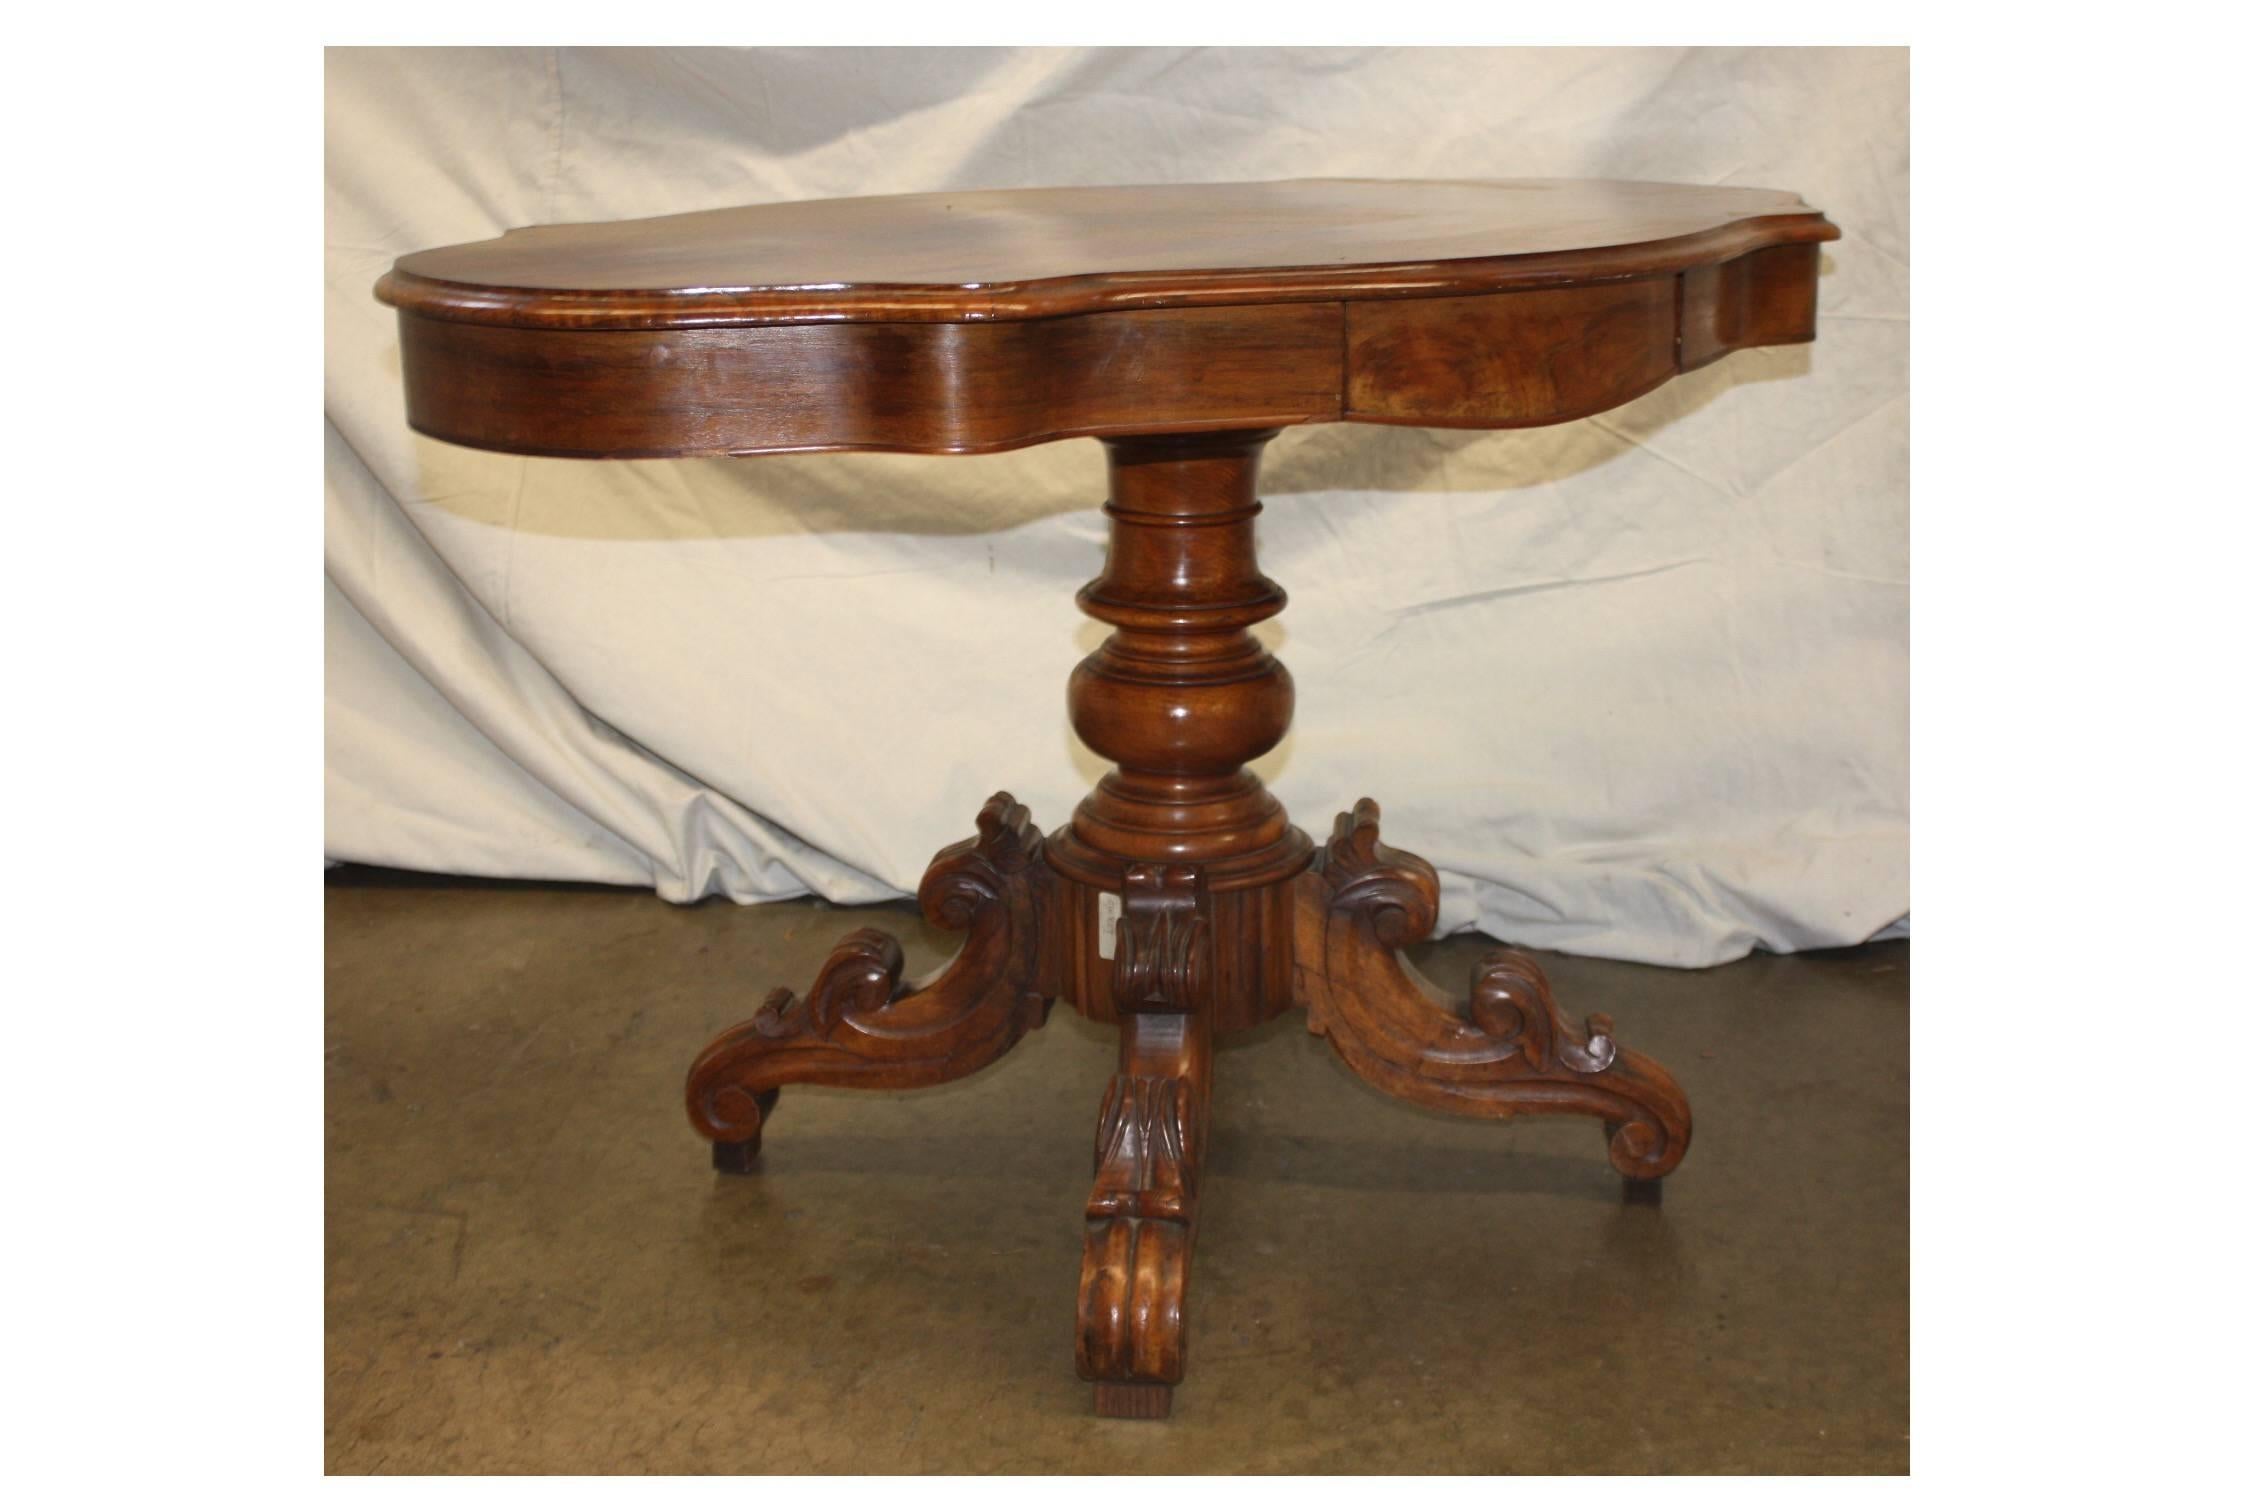 19th century French gueridon with a beautiful flamed walnut.